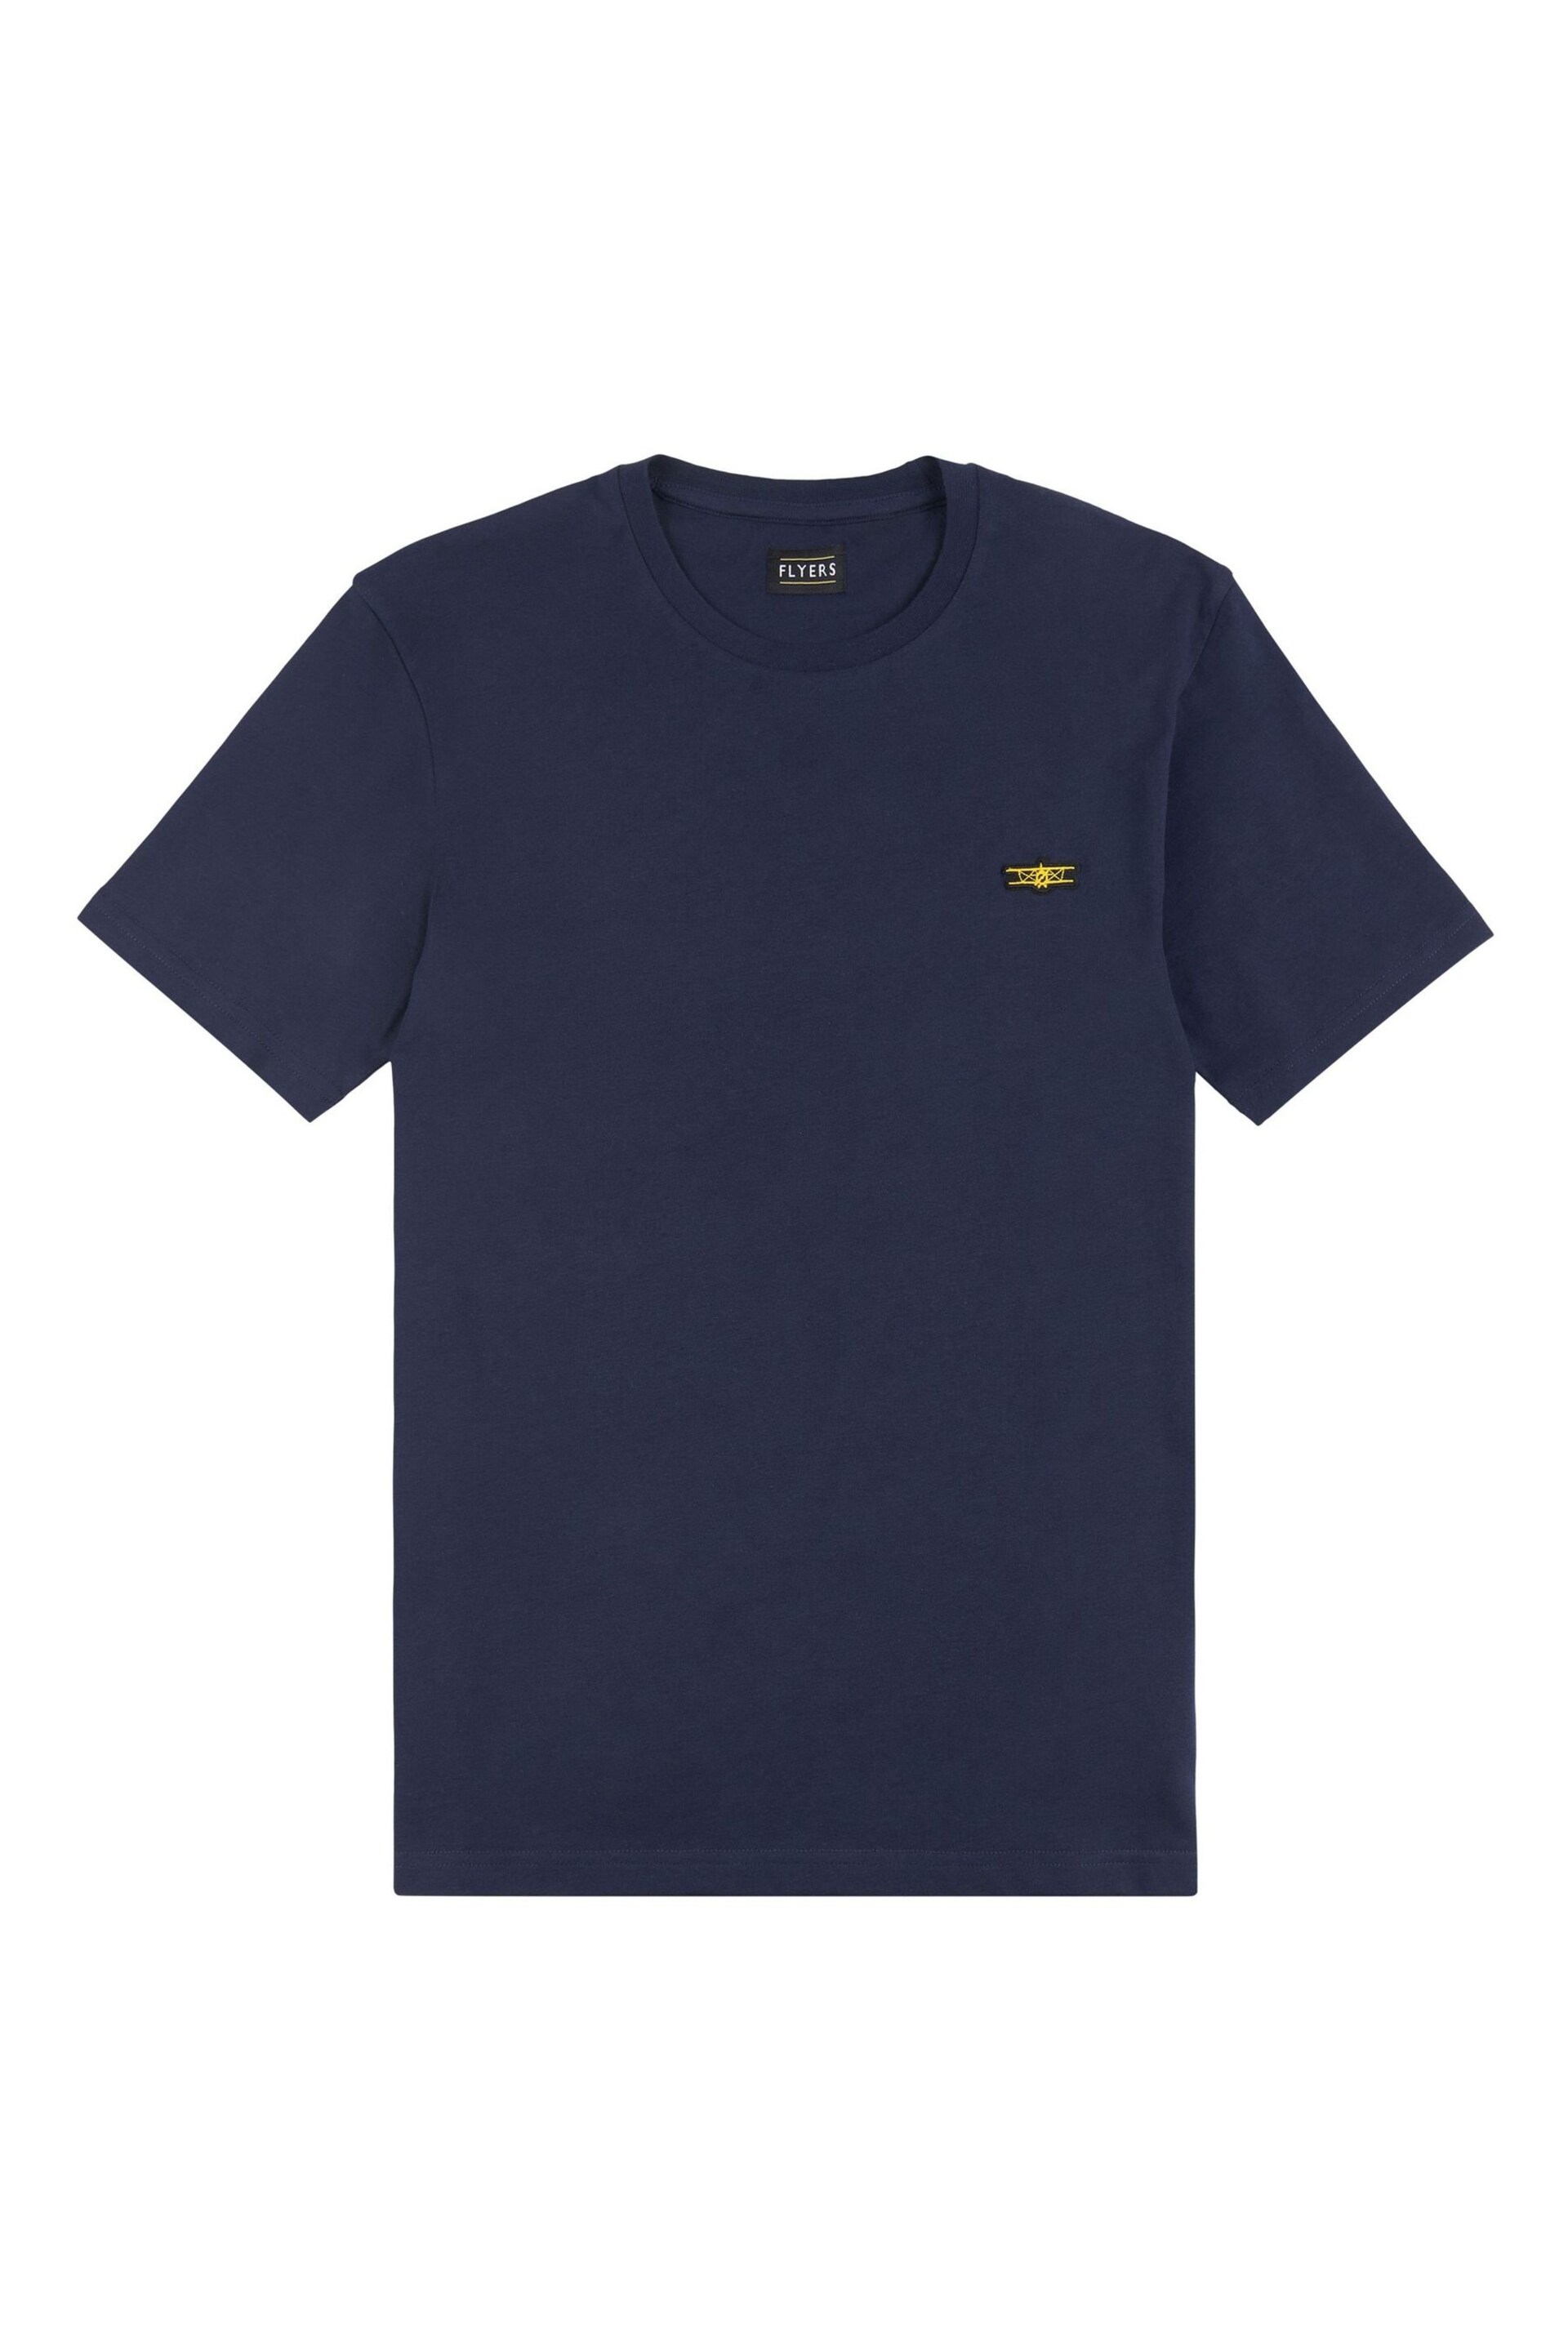 Flyers Mens Classic Fit T-Shirt - Image 6 of 8